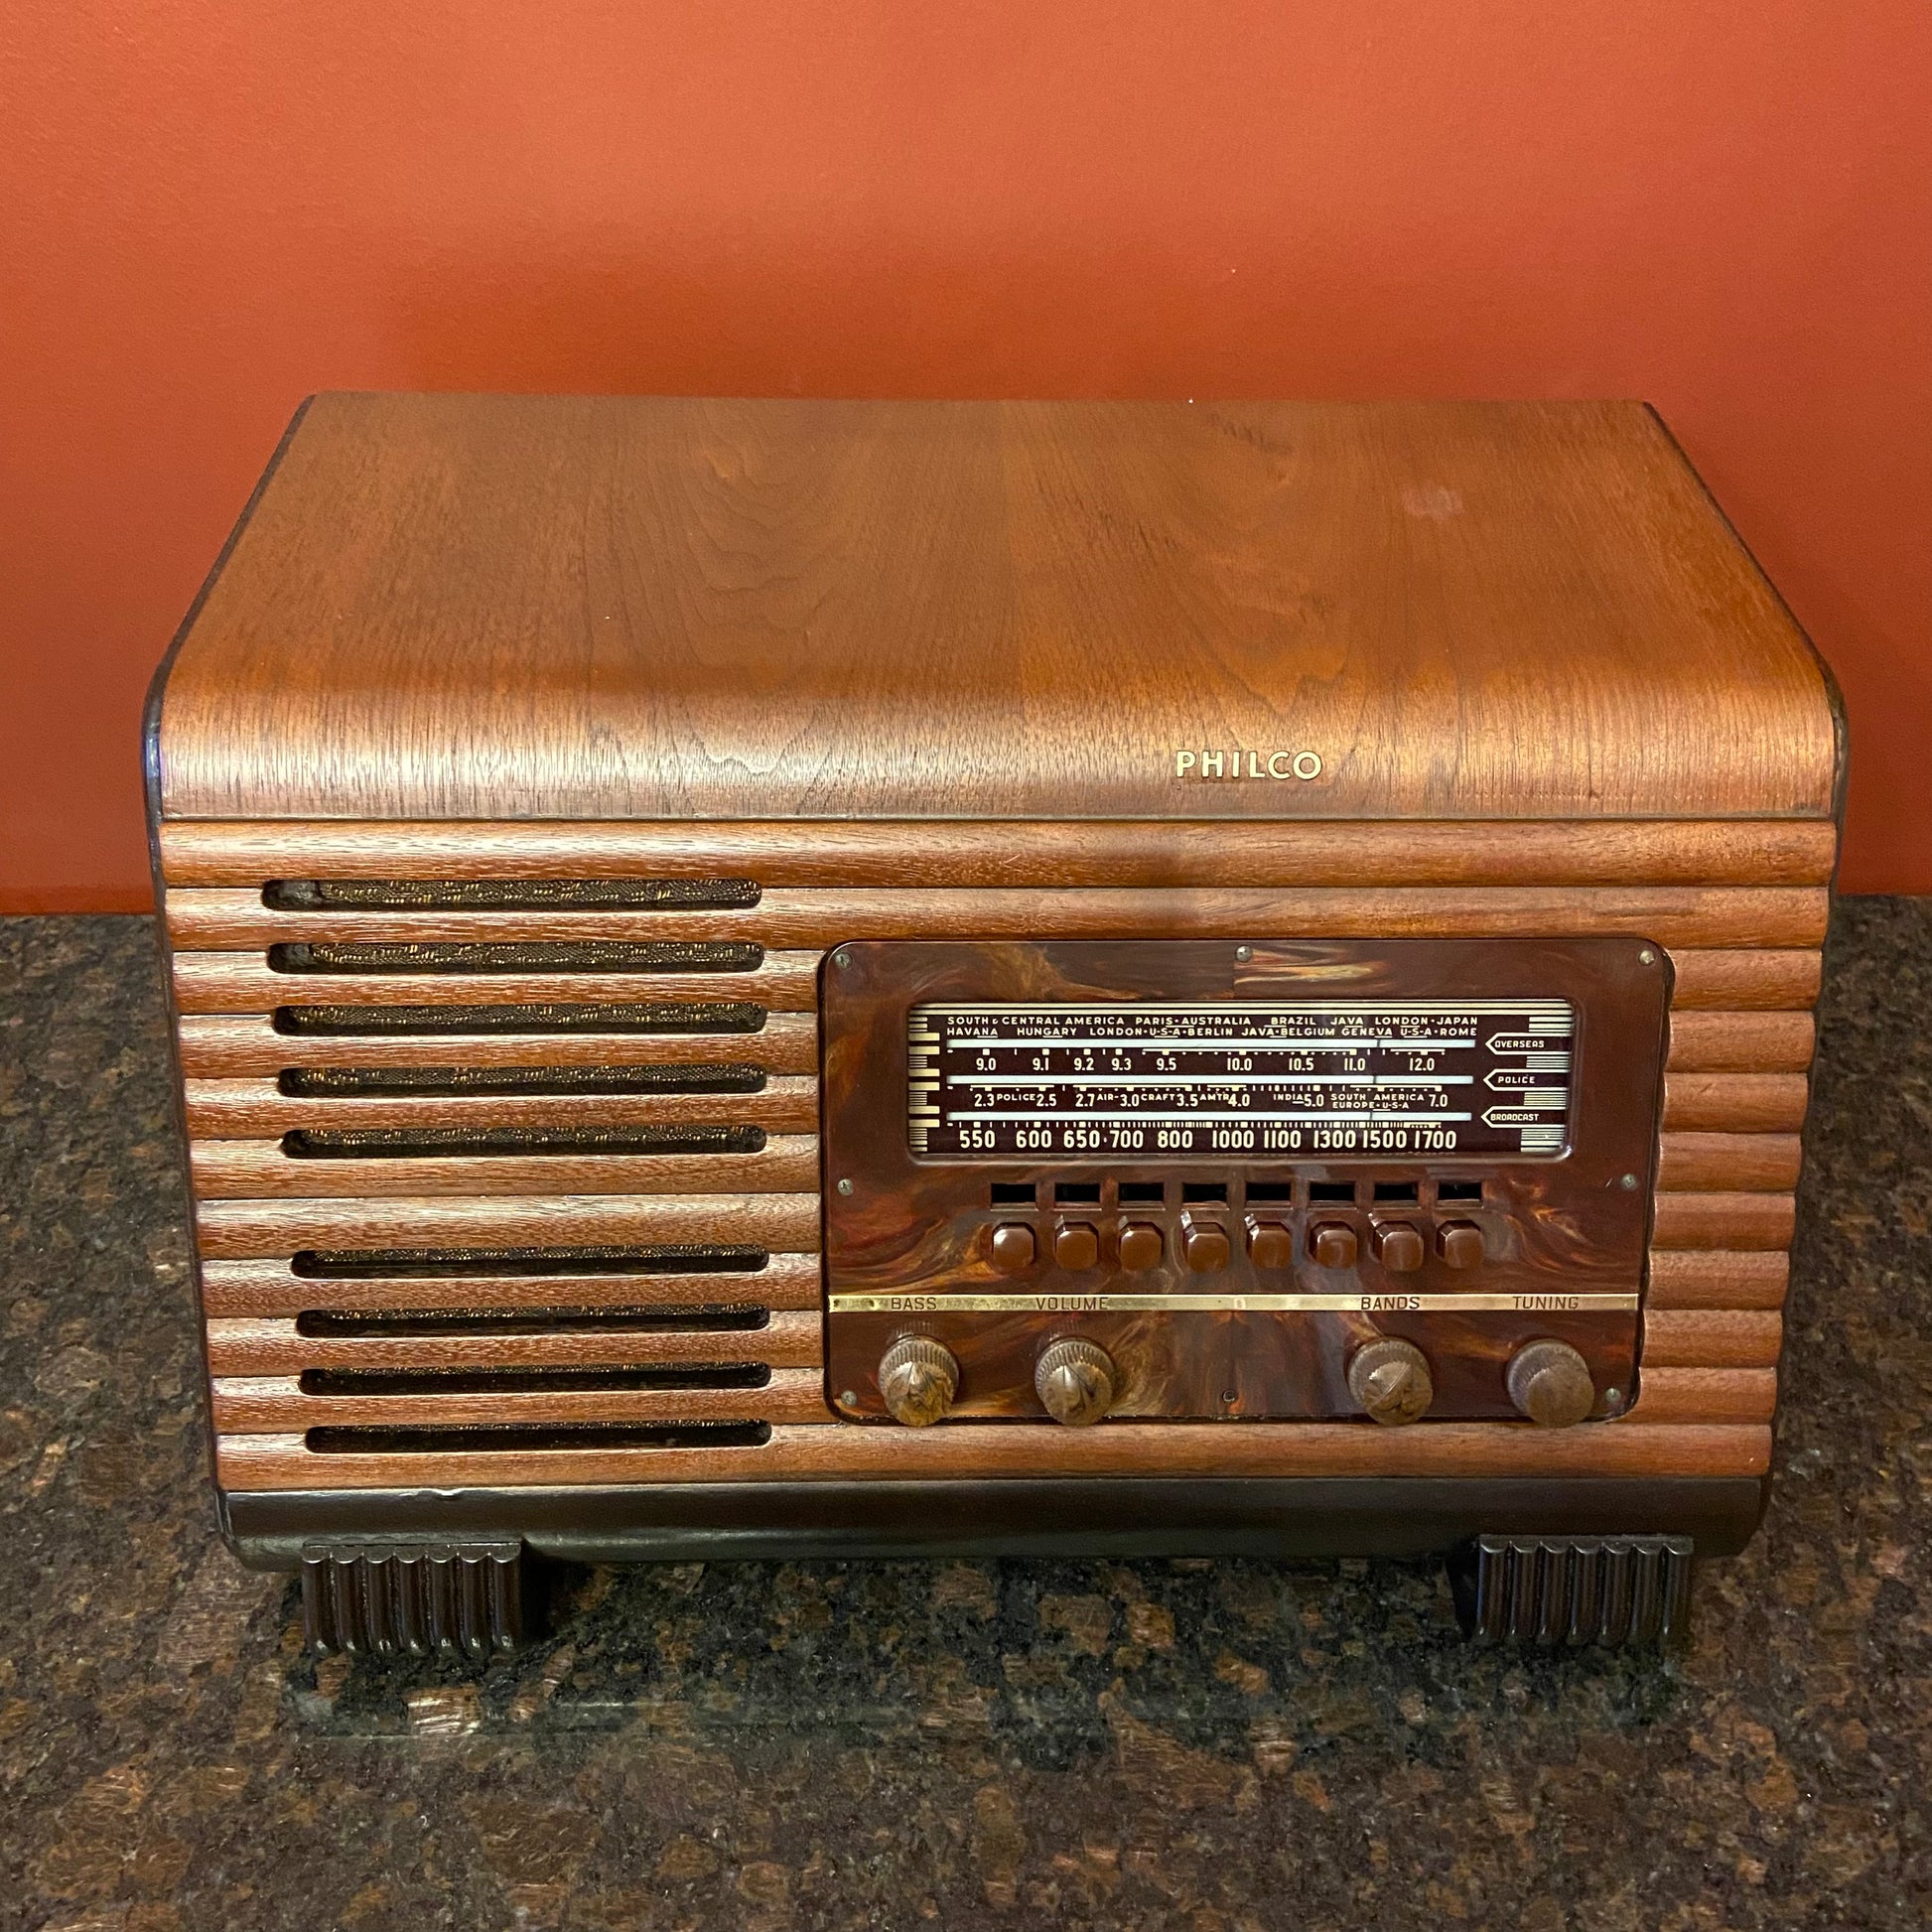 Product Details, Renovated Radios1941 Philco Brown Pushbuttons, Philco, Buttons